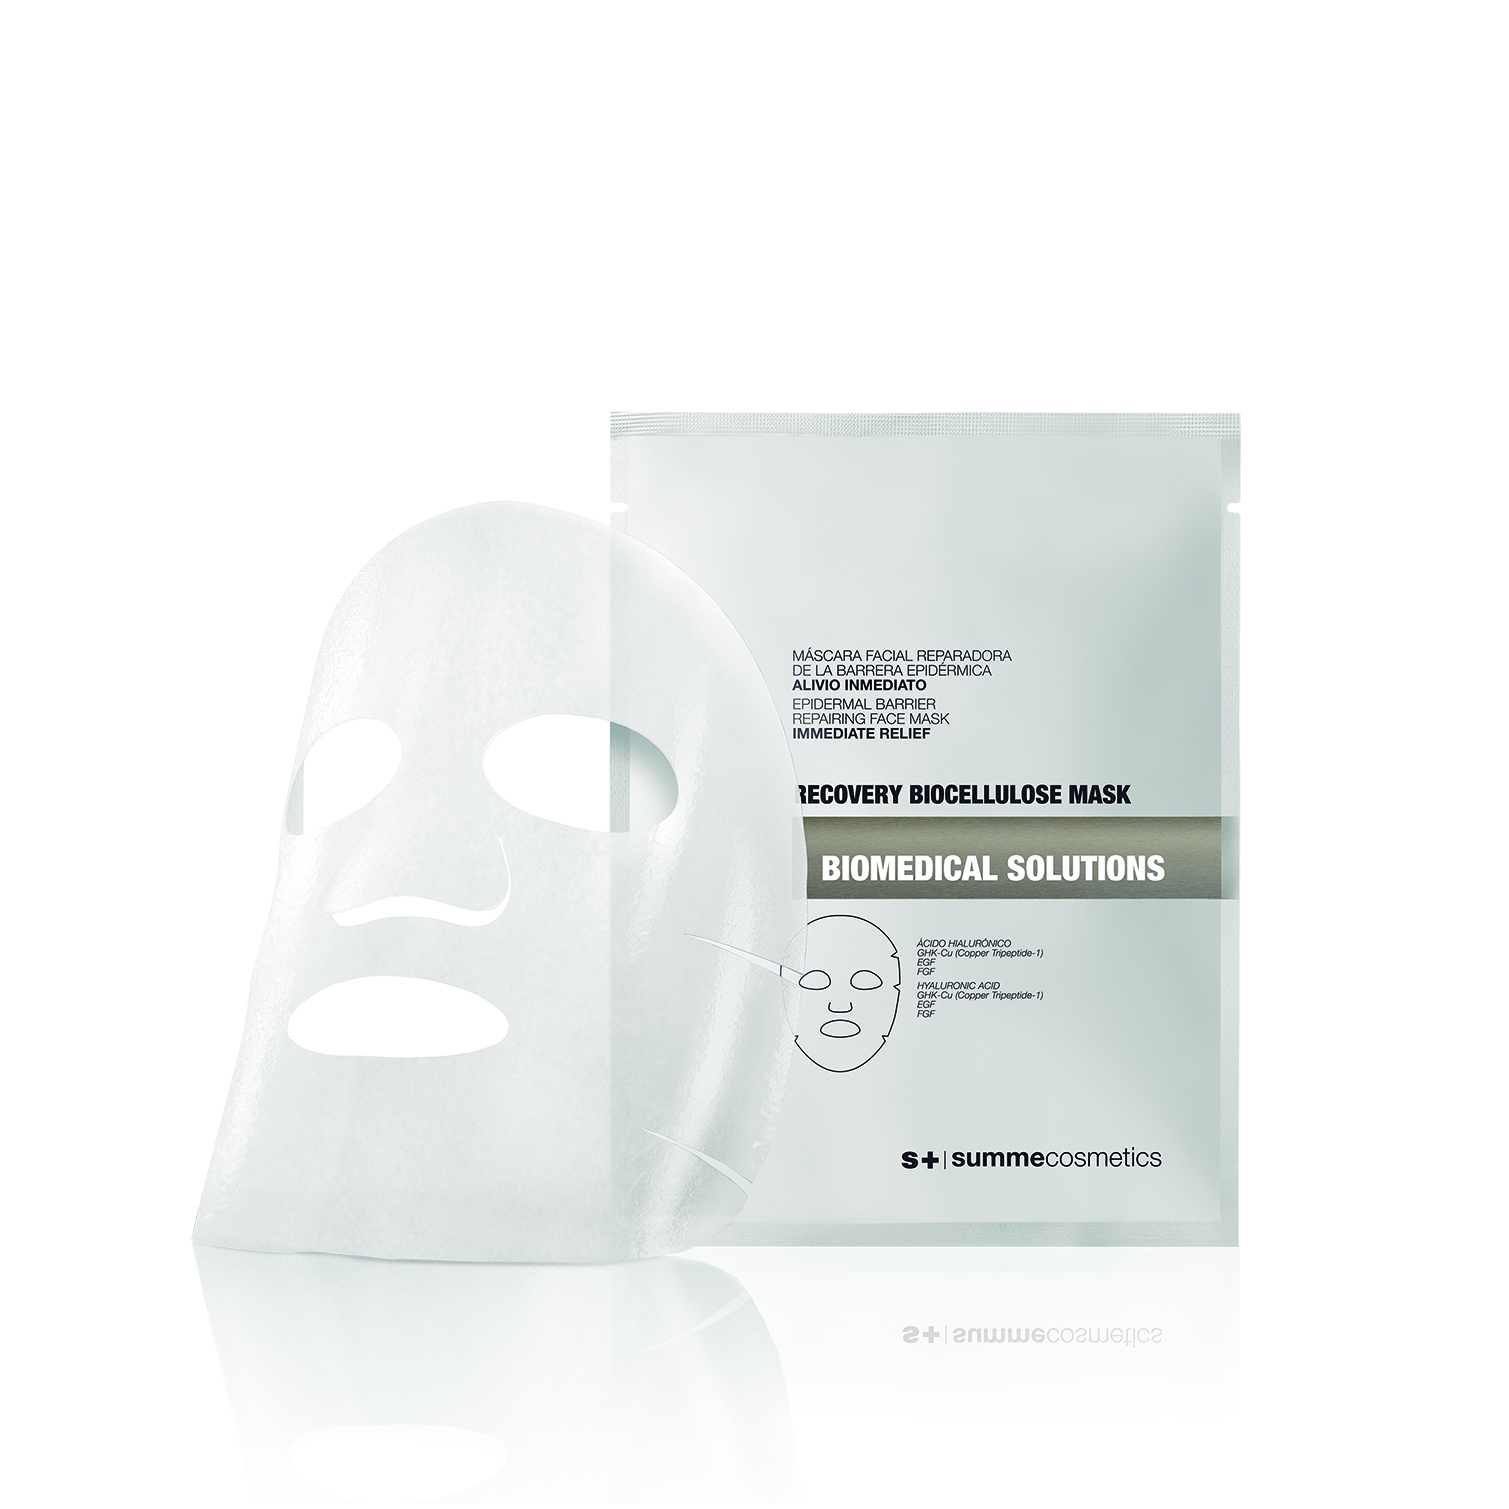 RECOVERY BIOCELLULOSE MASK